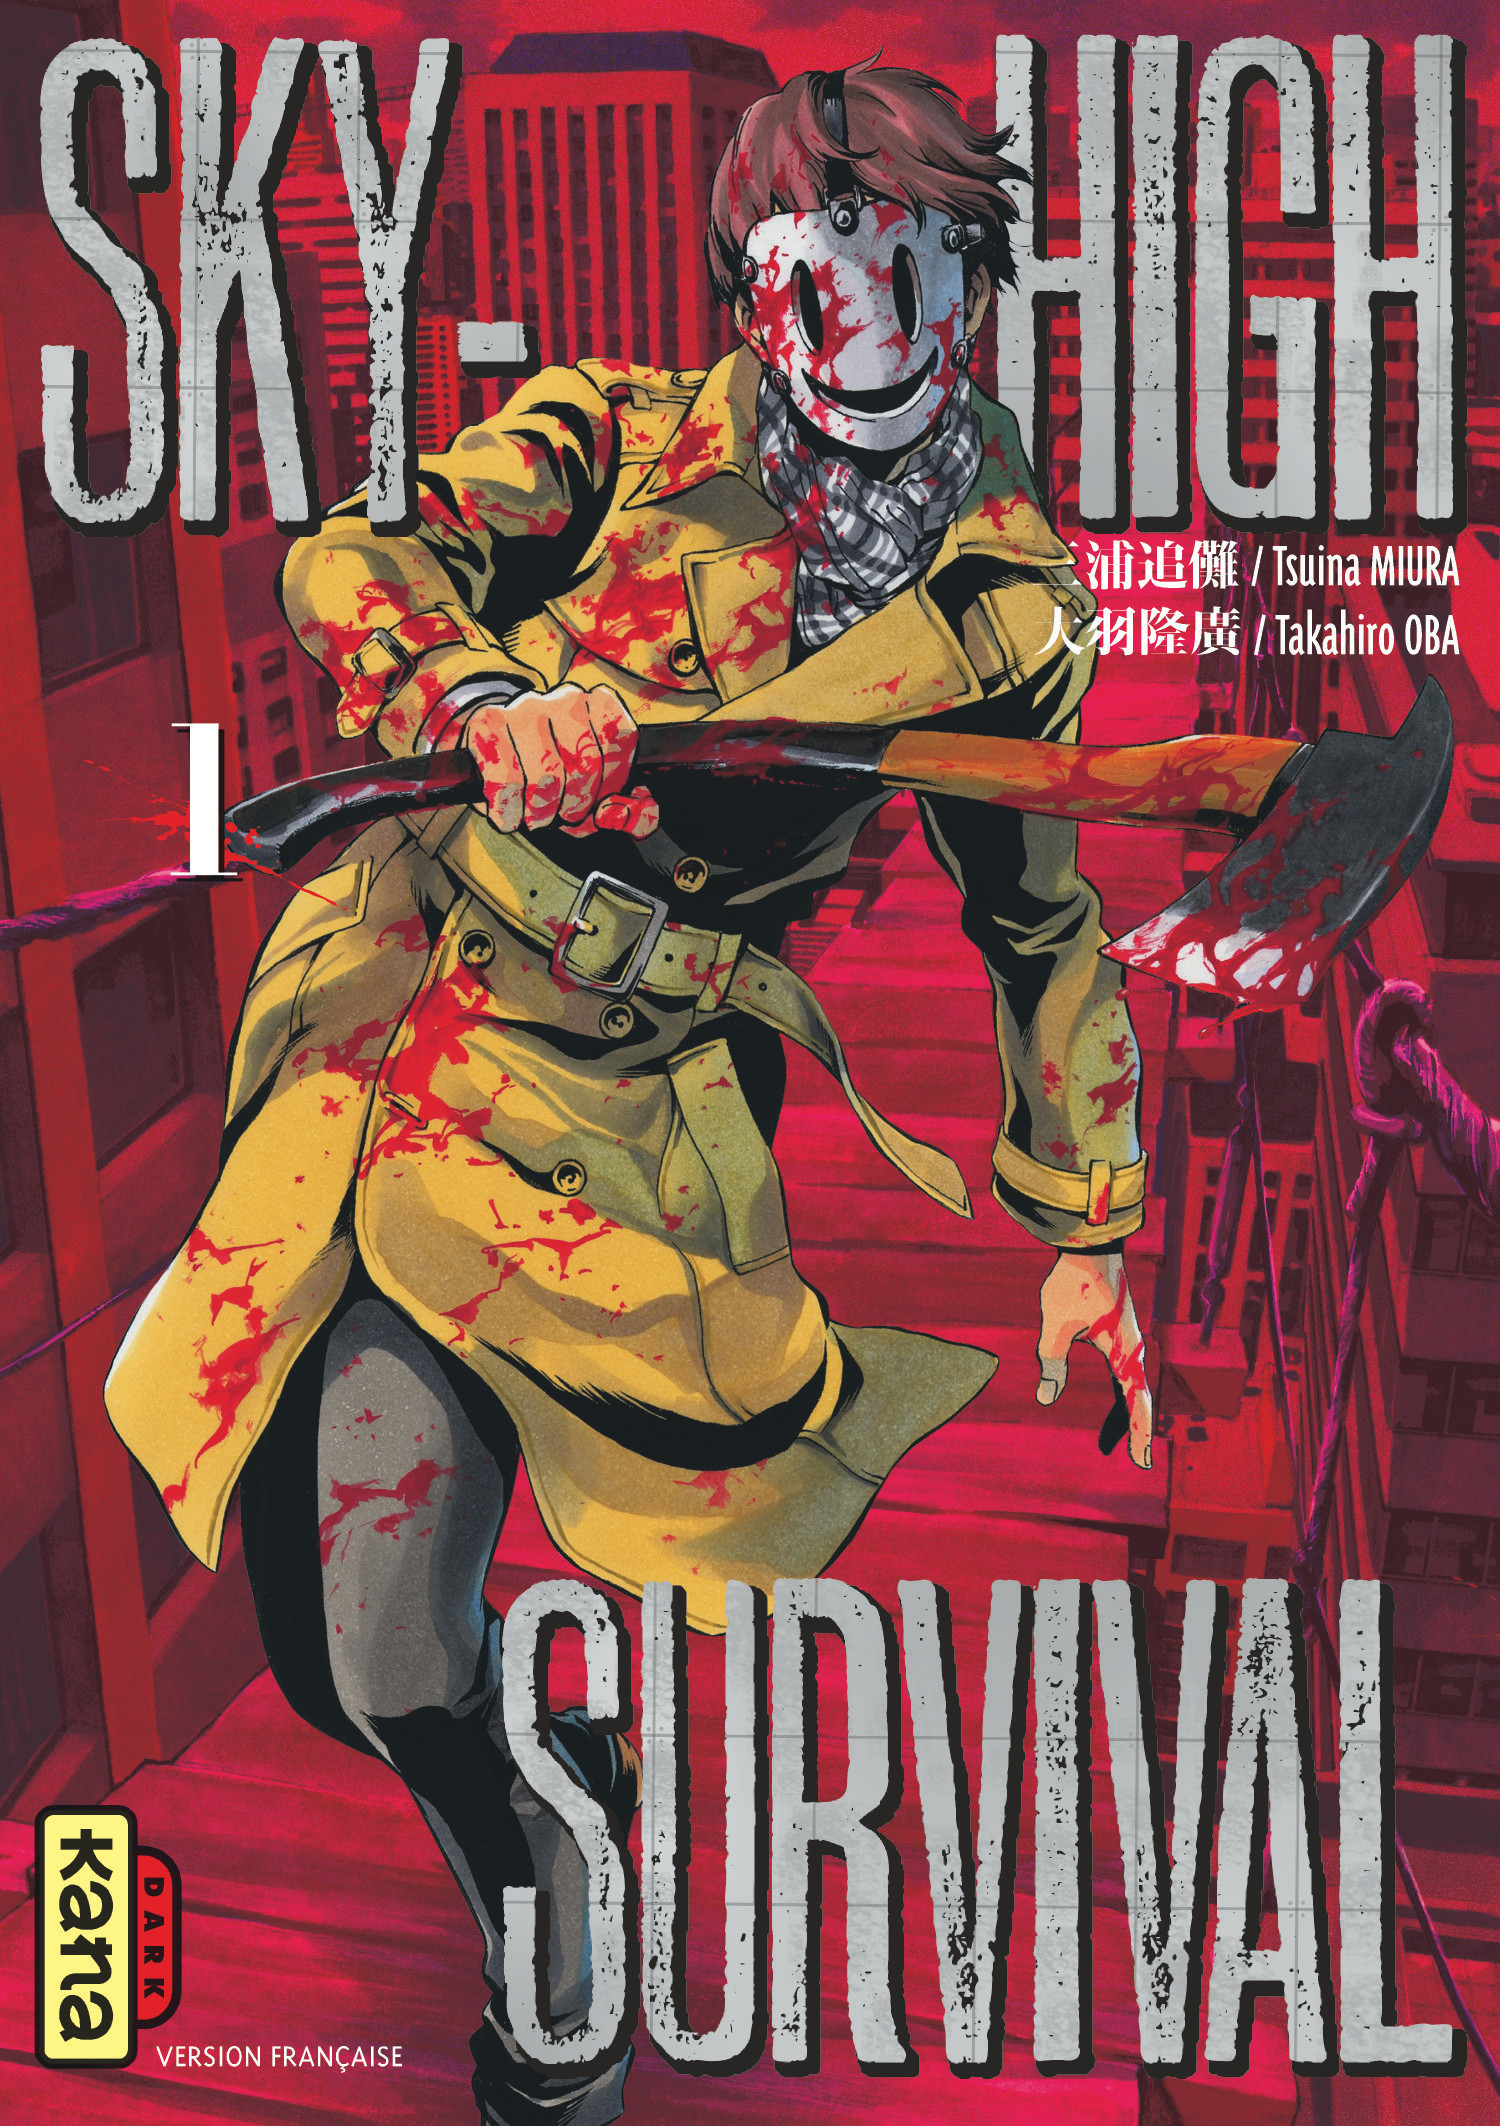 Sky-high survival – Tome 1 - couv